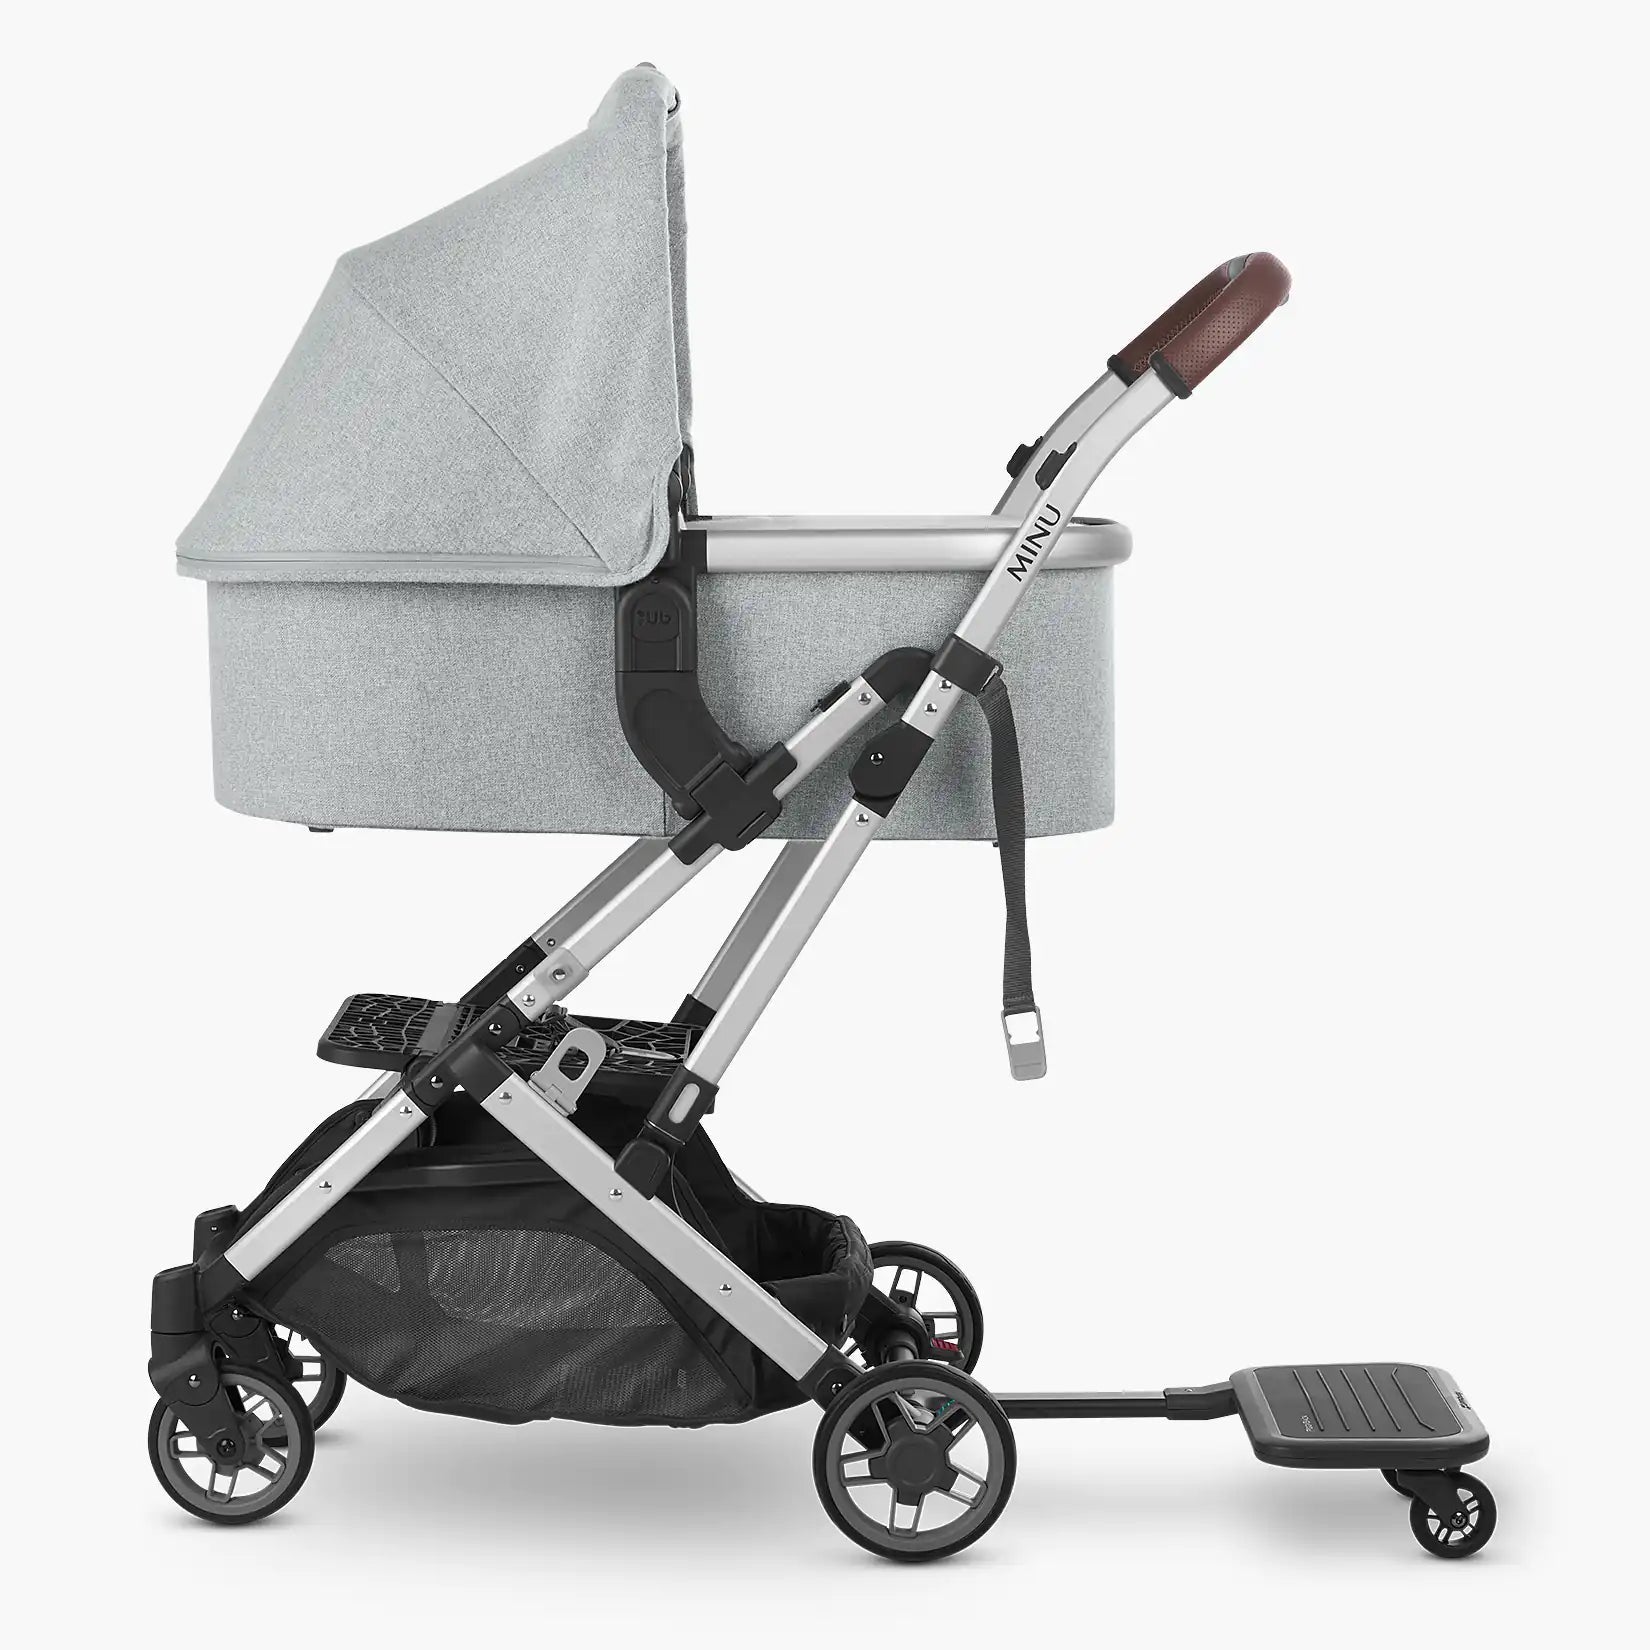 UPPAbaby PiggyBack For MINU And MINU 2 - ANB Baby -810030094104$75 - $100